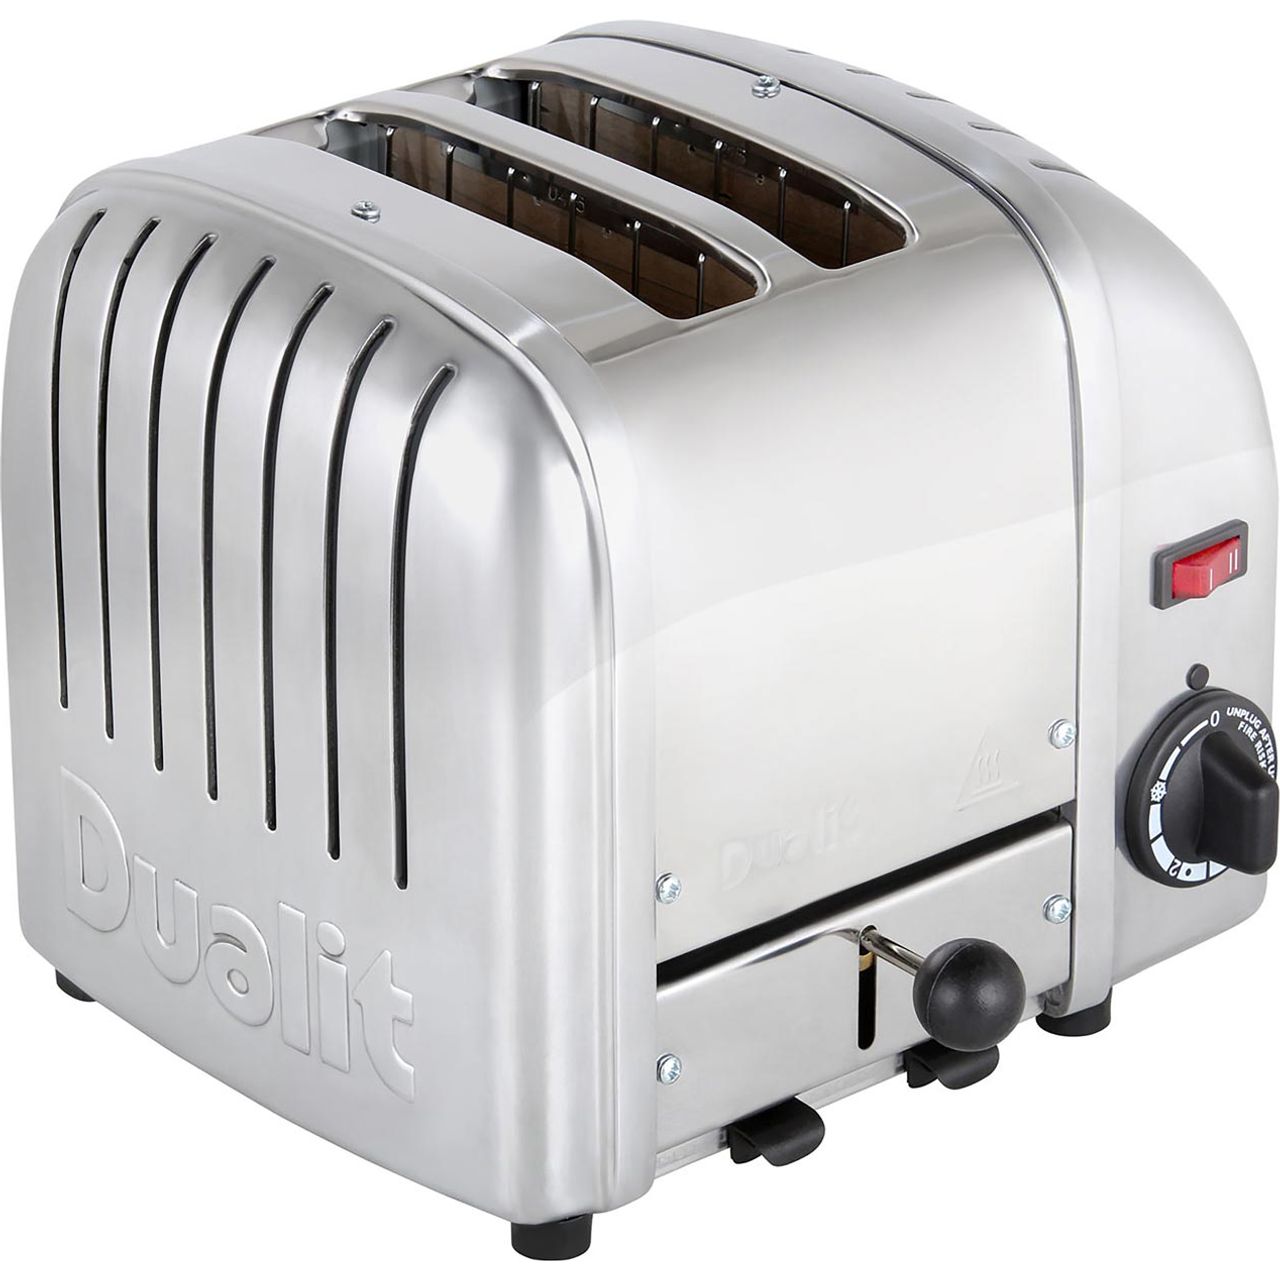 Dualit Toaster 2 slice Model A2BR/87 1250 WATTS England 2 Slice Tested